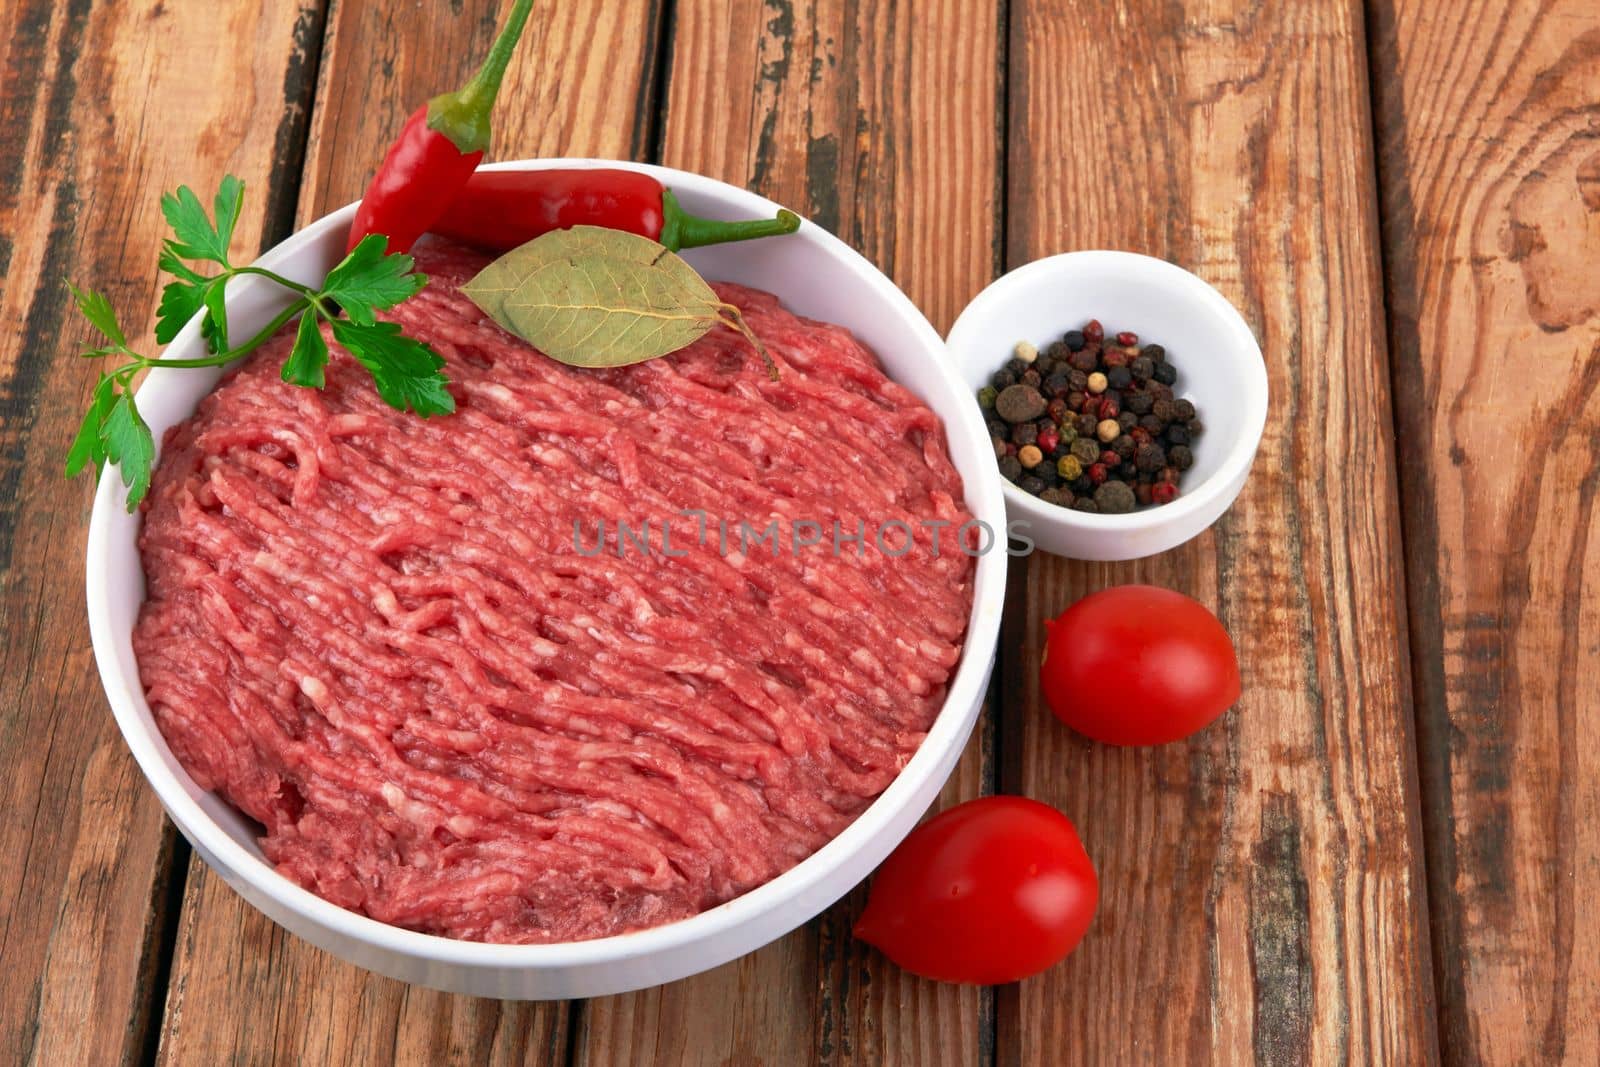 Pork and beef minced meat by pioneer111